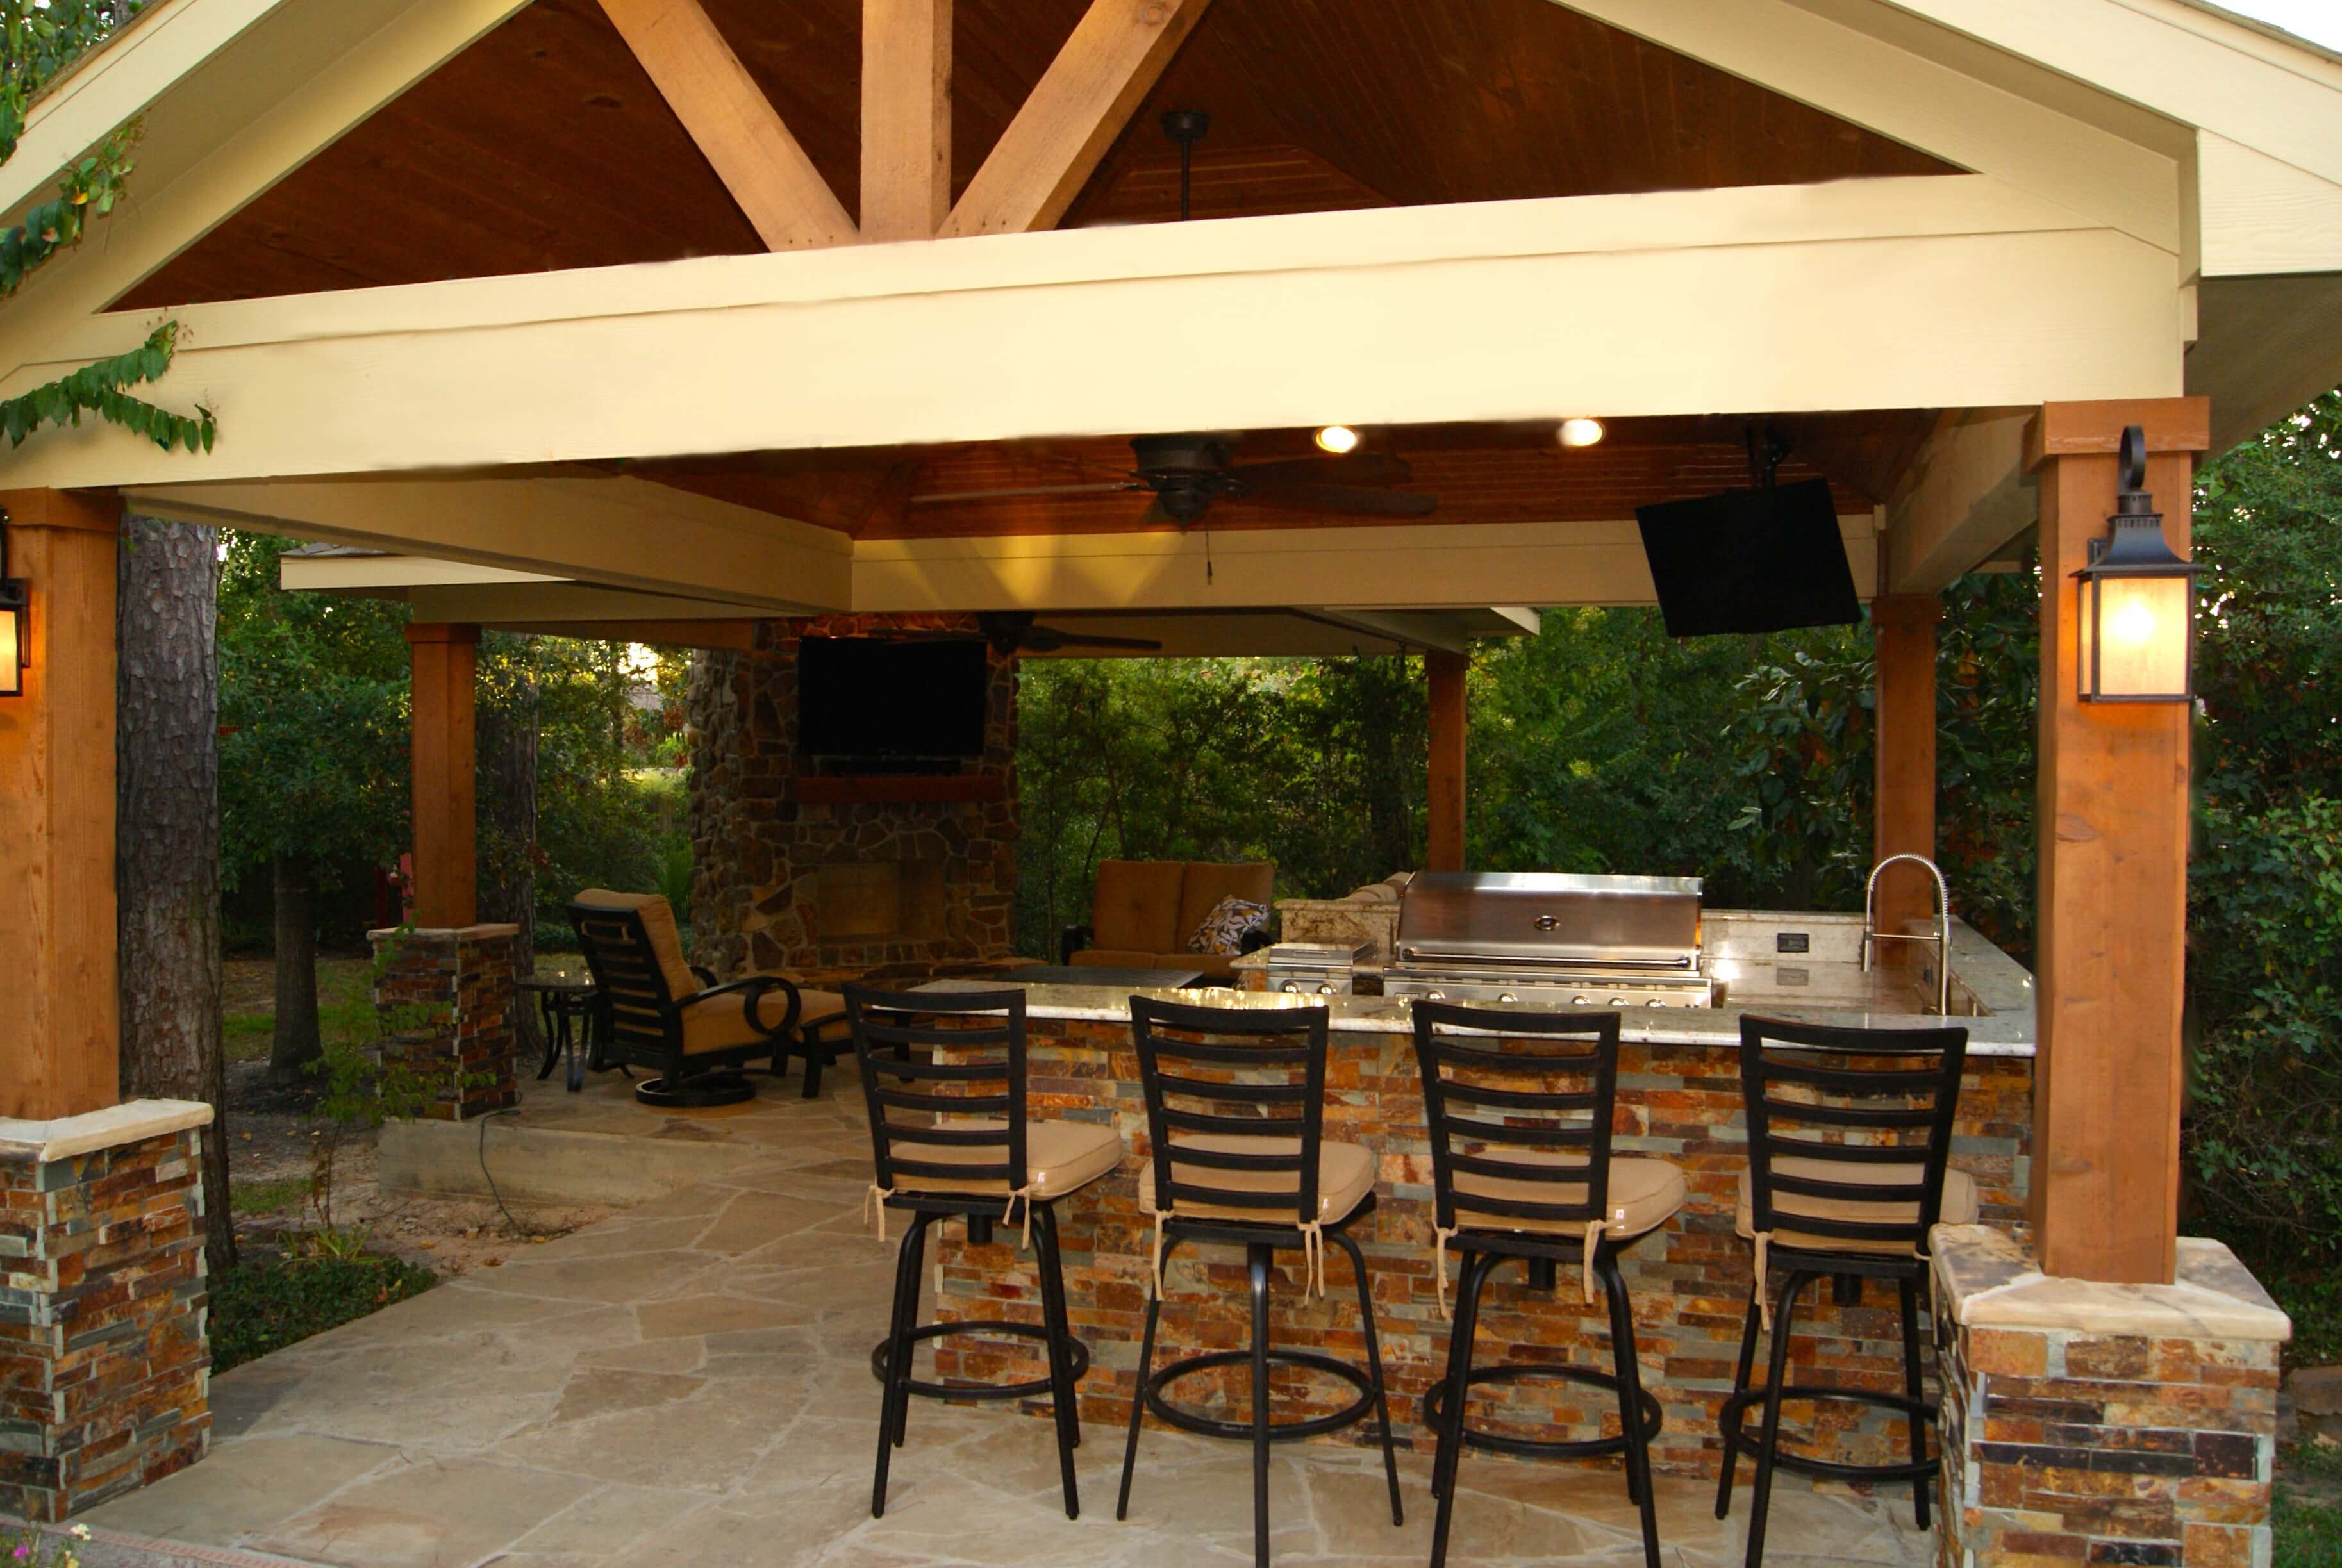 Freestanding Patio Cover With Kitchen & Fireplace In The